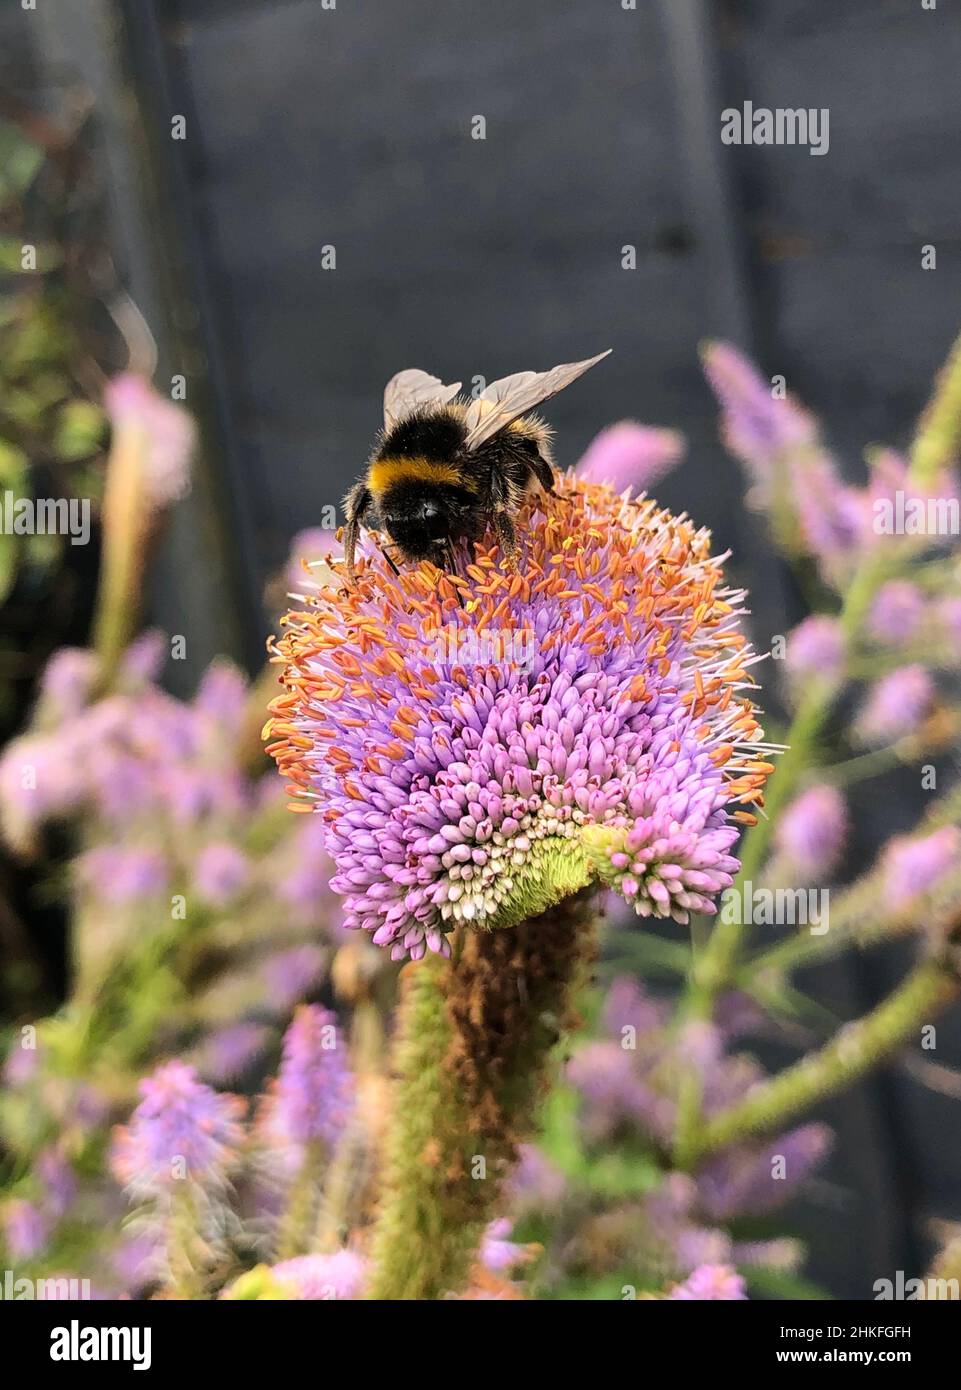 Bumble Bee on a flower head Stock Photo